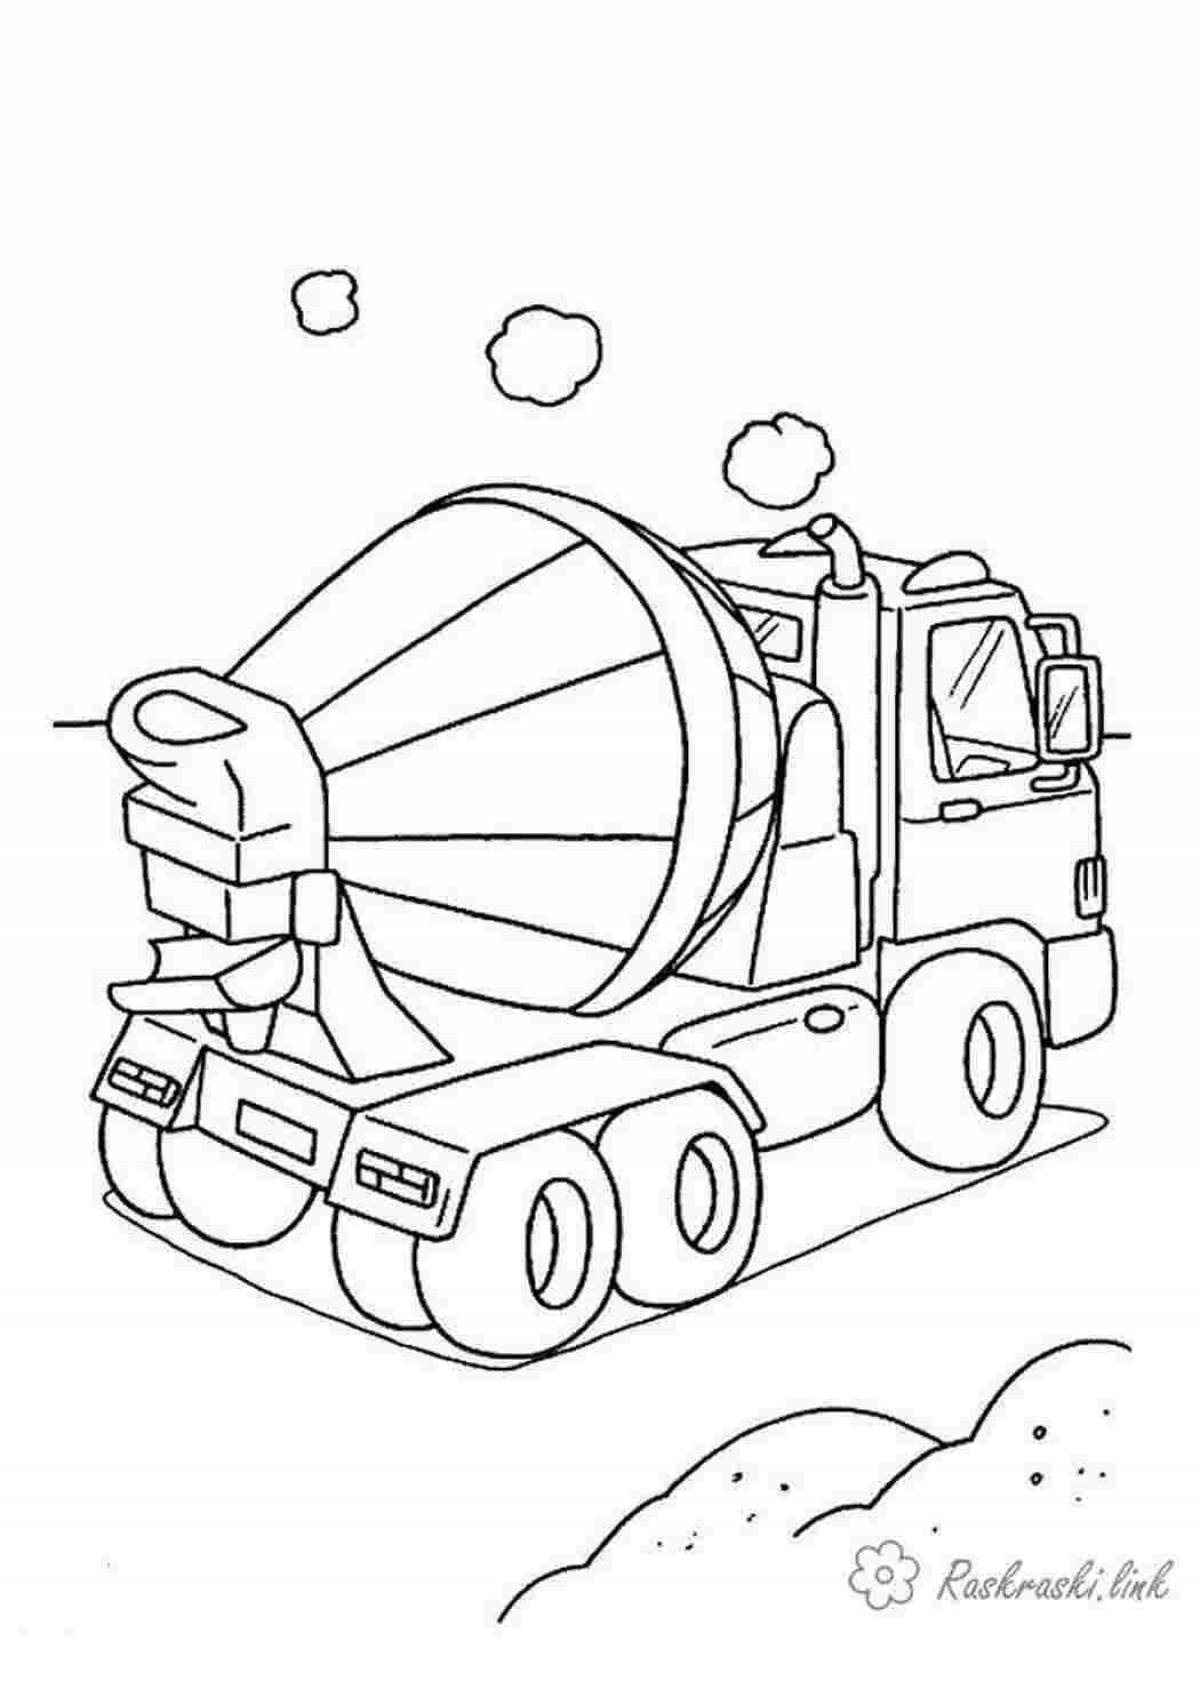 Exciting drill press coloring page